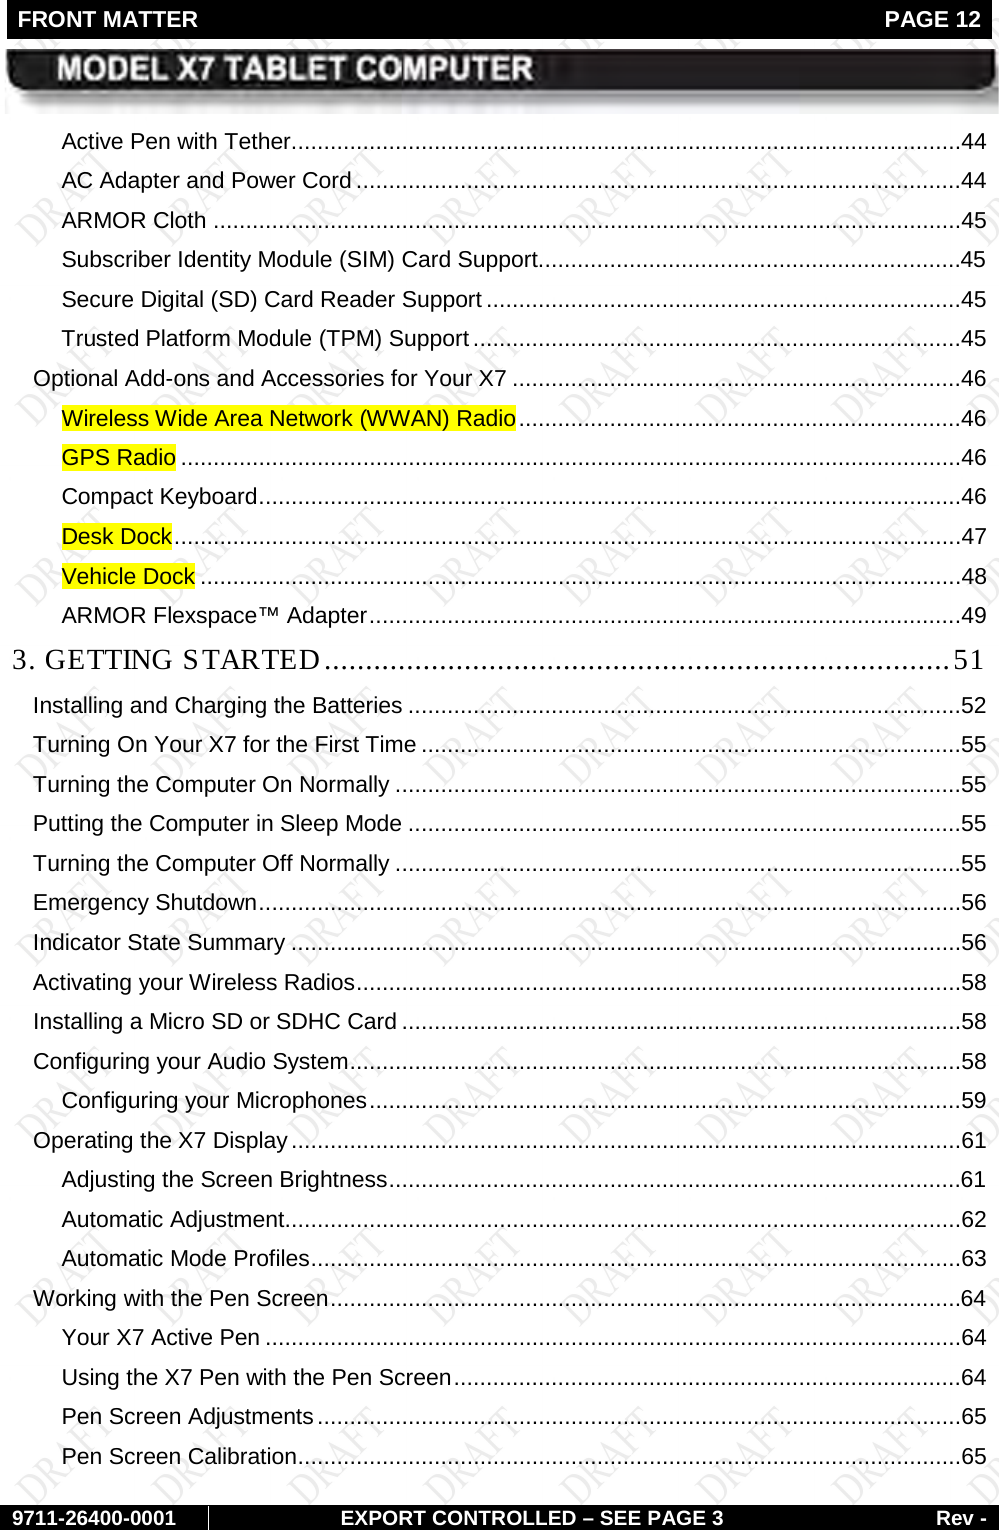 FRONT MATTER   PAGE 12        9711-26400-0001 EXPORT CONTROLLED – SEE PAGE 3 Rev - Active Pen with Tether .......................................................................................................44 AC Adapter and Power Cord .............................................................................................44 ARMOR Cloth ...................................................................................................................45 Subscriber Identity Module (SIM) Card Support.................................................................45 Secure Digital (SD) Card Reader Support .........................................................................45 Trusted Platform Module (TPM) Support ...........................................................................45 Optional Add-ons and Accessories for Your X7 .....................................................................46 Wireless Wide Area Network (WWAN) Radio ....................................................................46 GPS Radio ........................................................................................................................46 Compact Keyboard ............................................................................................................46 Desk Dock .........................................................................................................................47 Vehicle Dock .....................................................................................................................48 ARMOR Flexspace™ Adapter ...........................................................................................49 3. GETTING STARTED ............................................................................ 51 Installing and Charging the Batteries .....................................................................................52 Turning On Your X7 for the First Time ...................................................................................55 Turning the Computer On Normally .......................................................................................55 Putting the Computer in Sleep Mode .....................................................................................55 Turning the Computer Off Normally .......................................................................................55 Emergency Shutdown ............................................................................................................56 Indicator State Summary .......................................................................................................56 Activating your Wireless Radios .............................................................................................58 Installing a Micro SD or SDHC Card ......................................................................................58 Configuring your Audio System ..............................................................................................58 Configuring your Microphones ...........................................................................................59 Operating the X7 Display .......................................................................................................61 Adjusting the Screen Brightness ........................................................................................61 Automatic Adjustment........................................................................................................62 Automatic Mode Profiles ....................................................................................................63 Working with the Pen Screen .................................................................................................64 Your X7 Active Pen ...........................................................................................................64 Using the X7 Pen with the Pen Screen ..............................................................................64 Pen Screen Adjustments ...................................................................................................65 Pen Screen Calibration ......................................................................................................65 